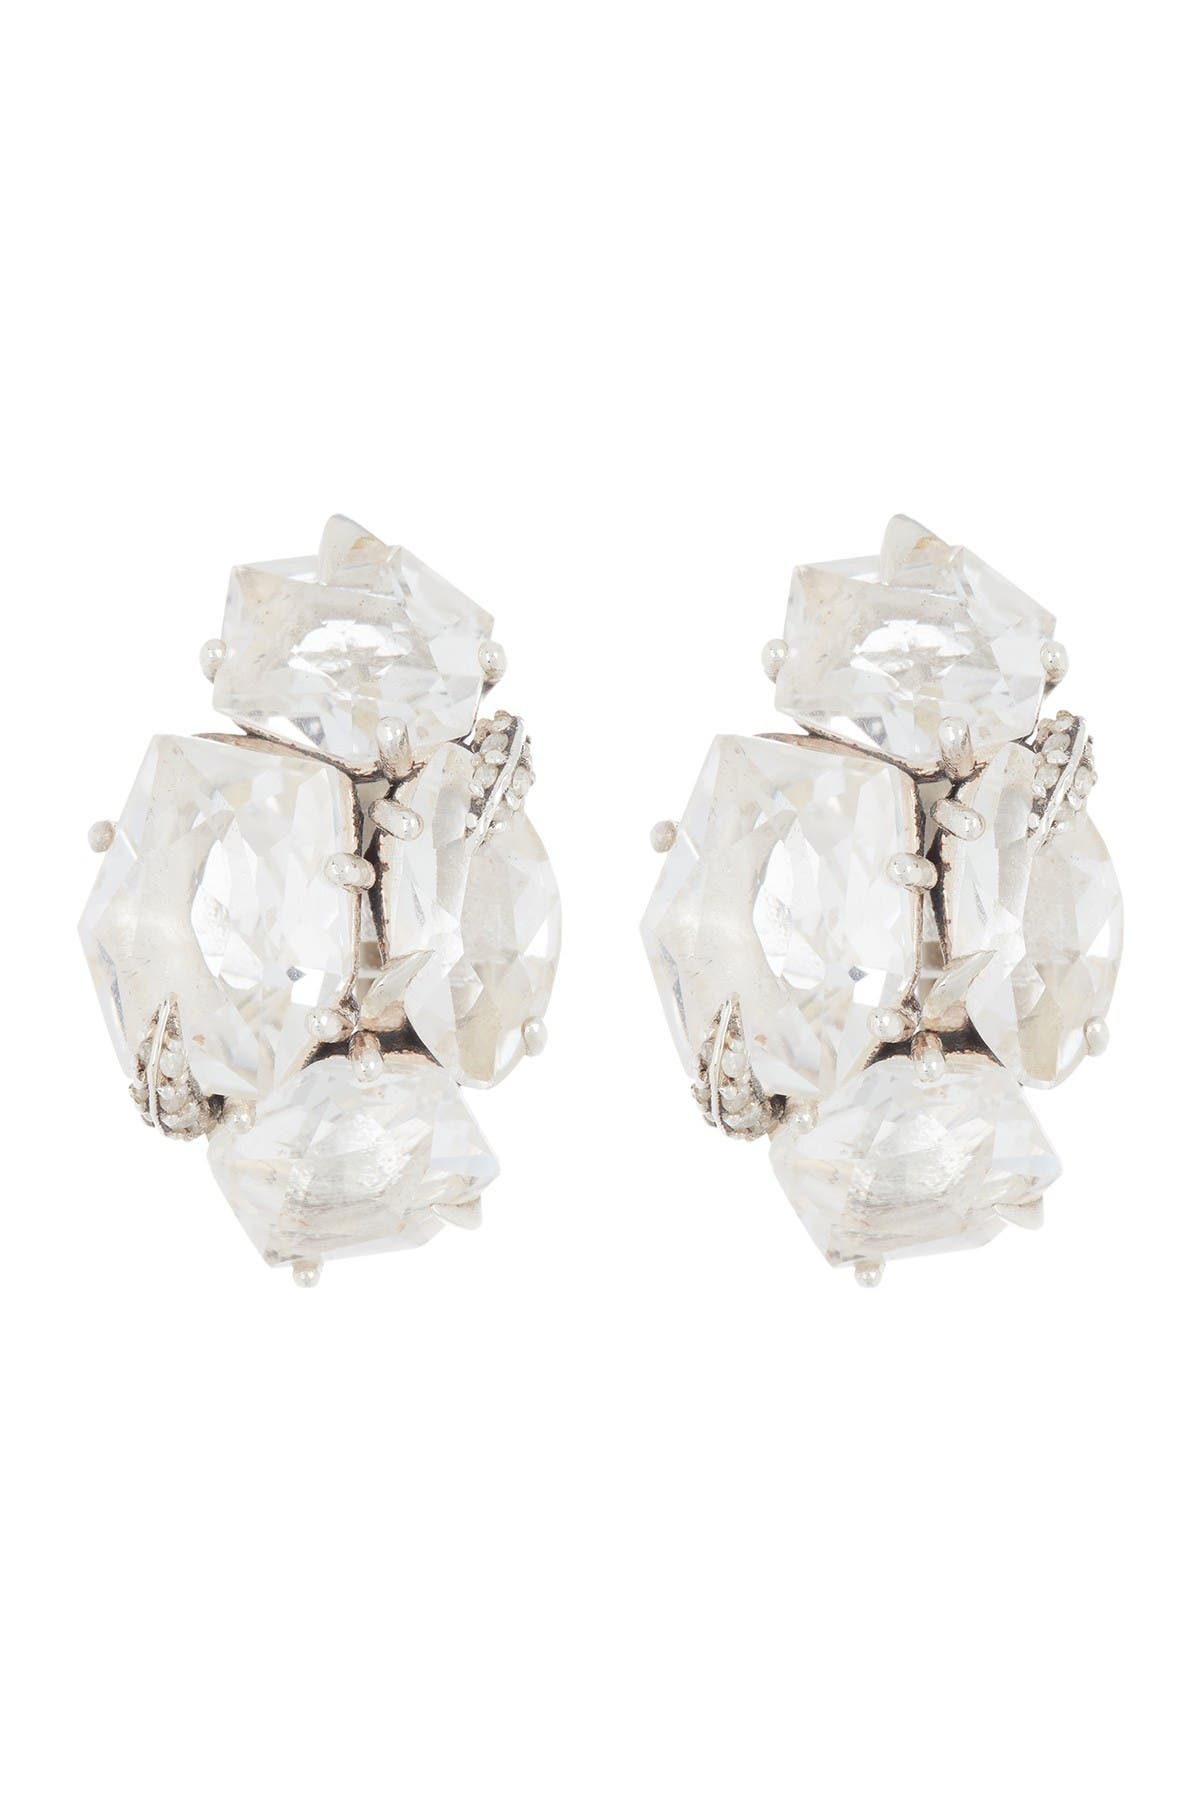 Alexis Bittar Sterling Silver Quartz & Diamond Cluster Clip-on Stud Earrings In Gry Dia 0.16 Cq Ss